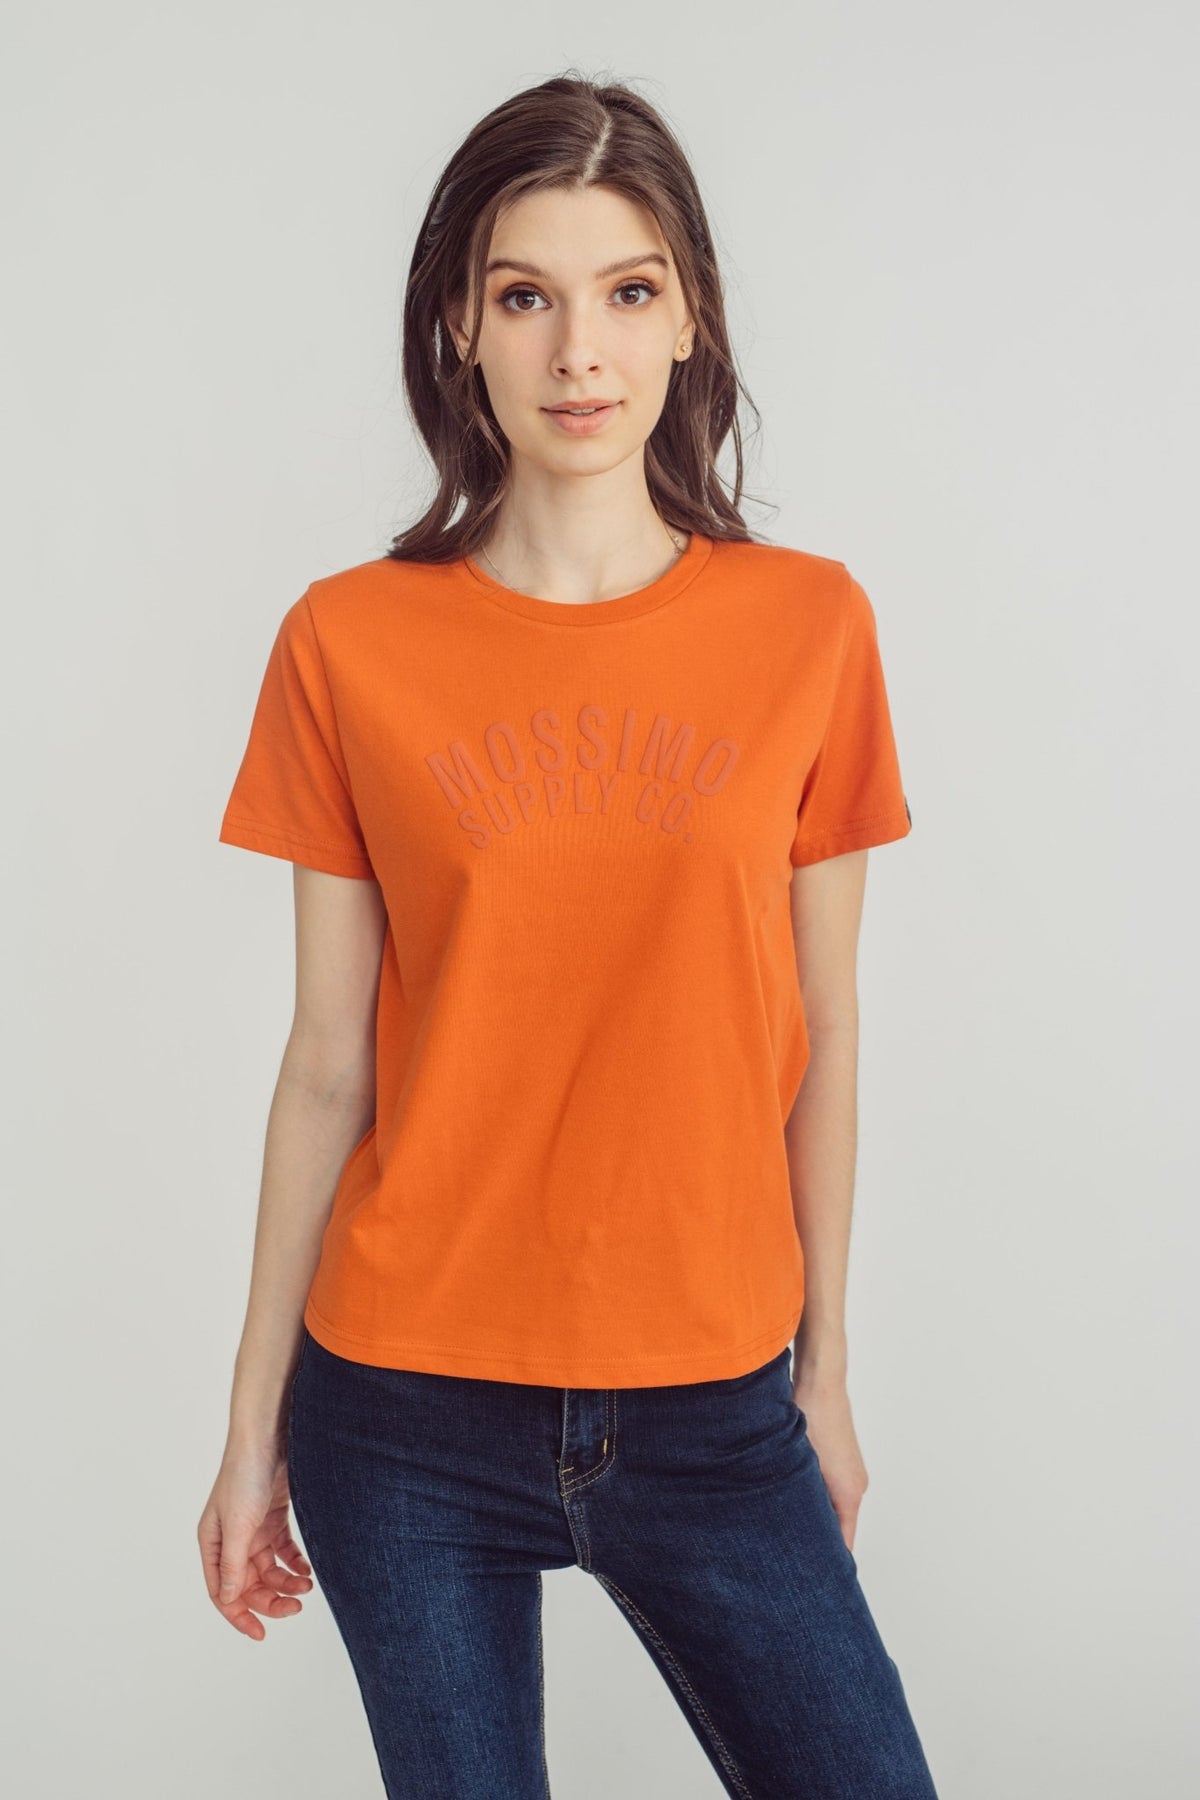 Rust with Mossimo Supply Co. Classic Fit Tee - Mossimo PH